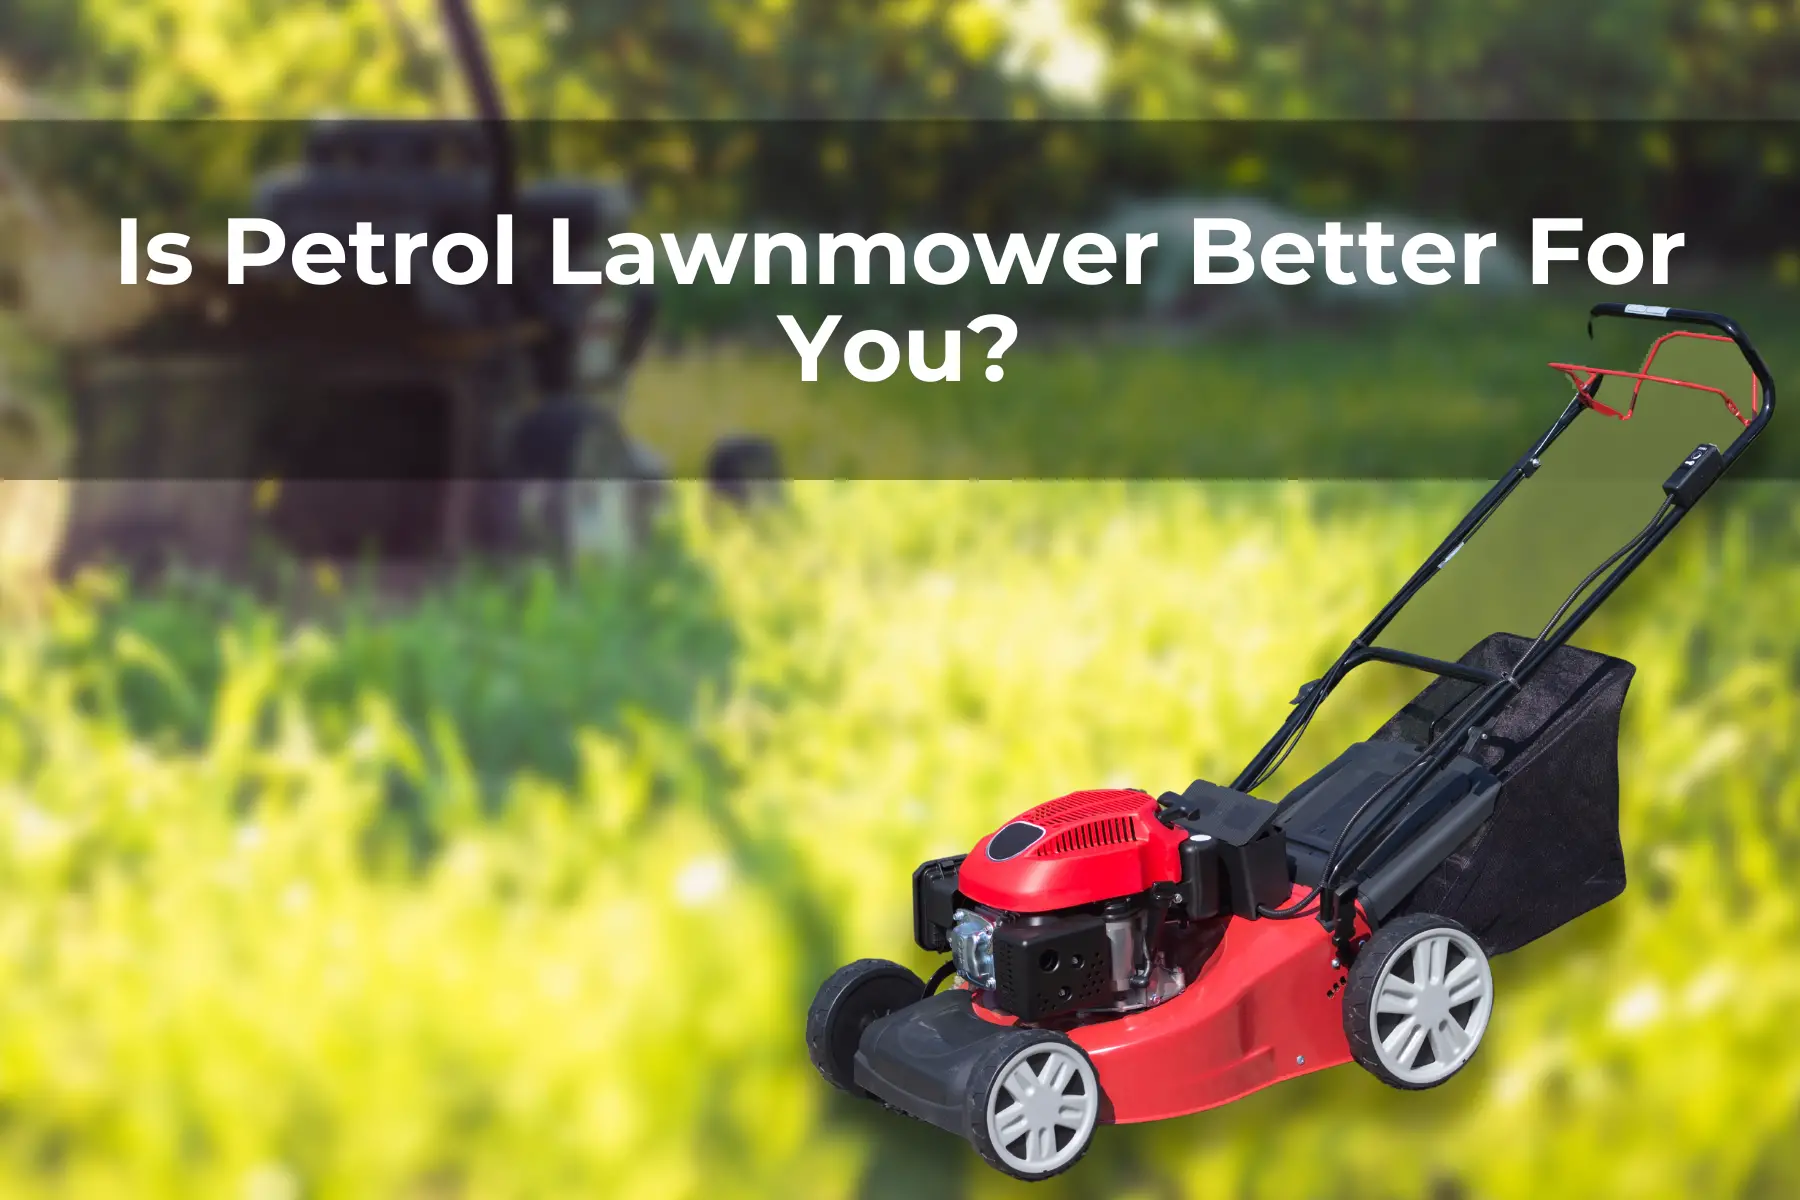 Is Petrol Lawnmower Better For You?